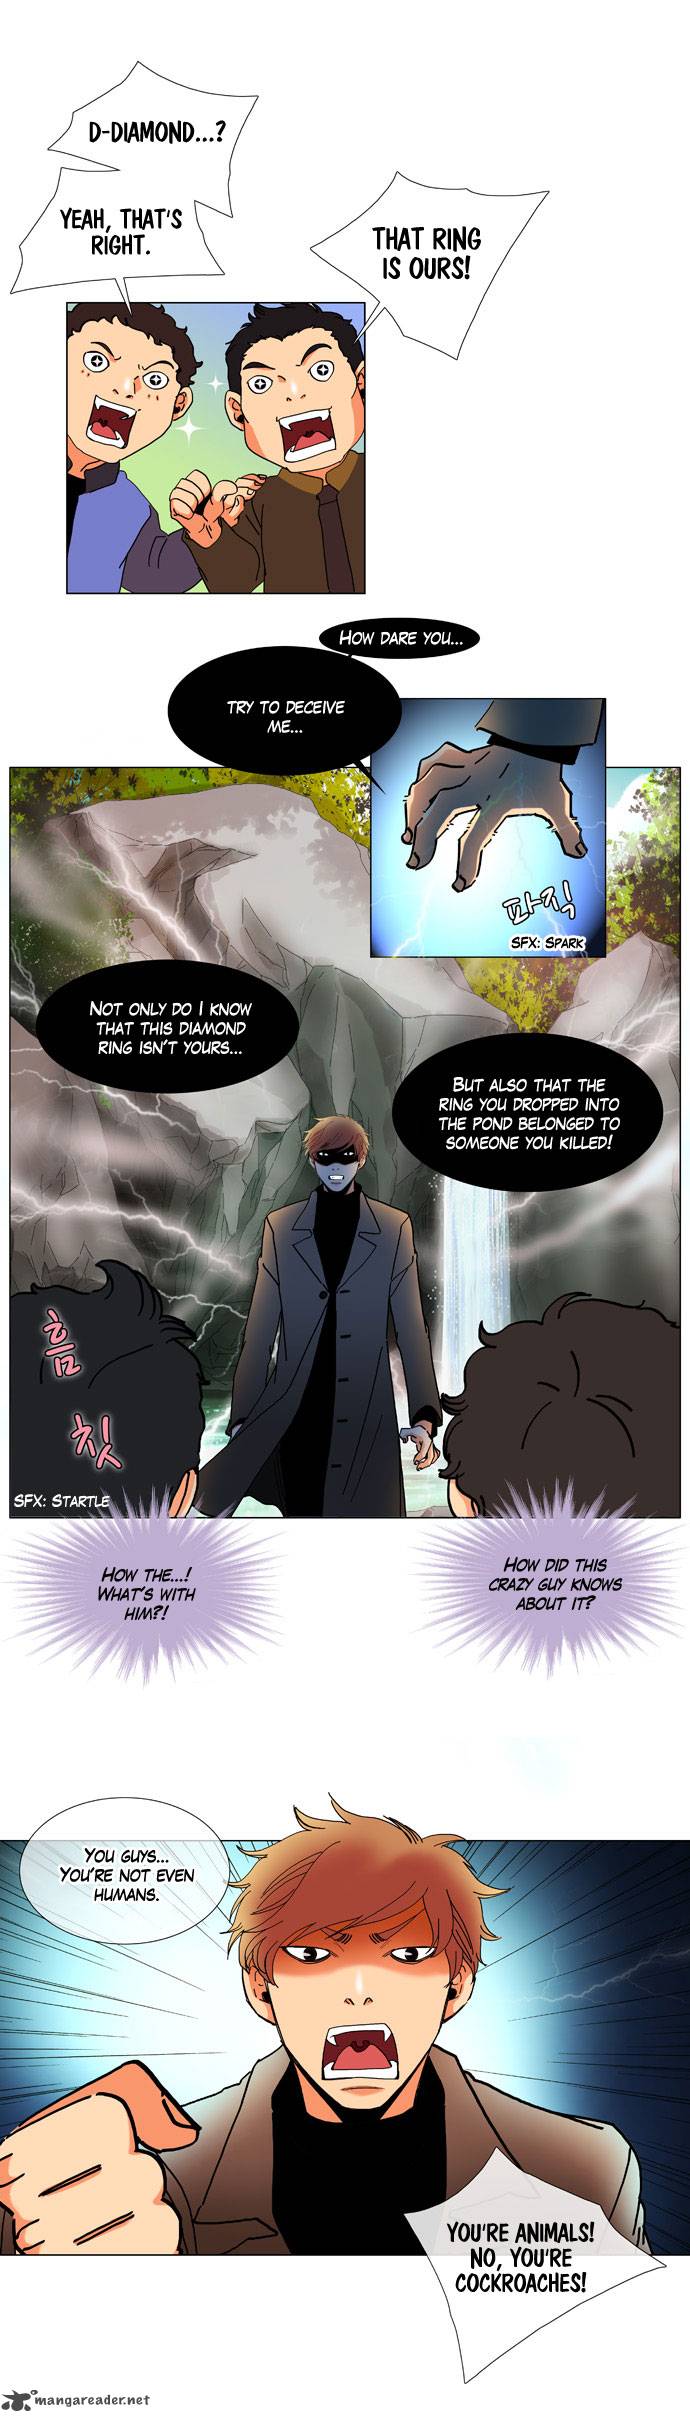 Rainbow Rose Chapter 1 Page 8